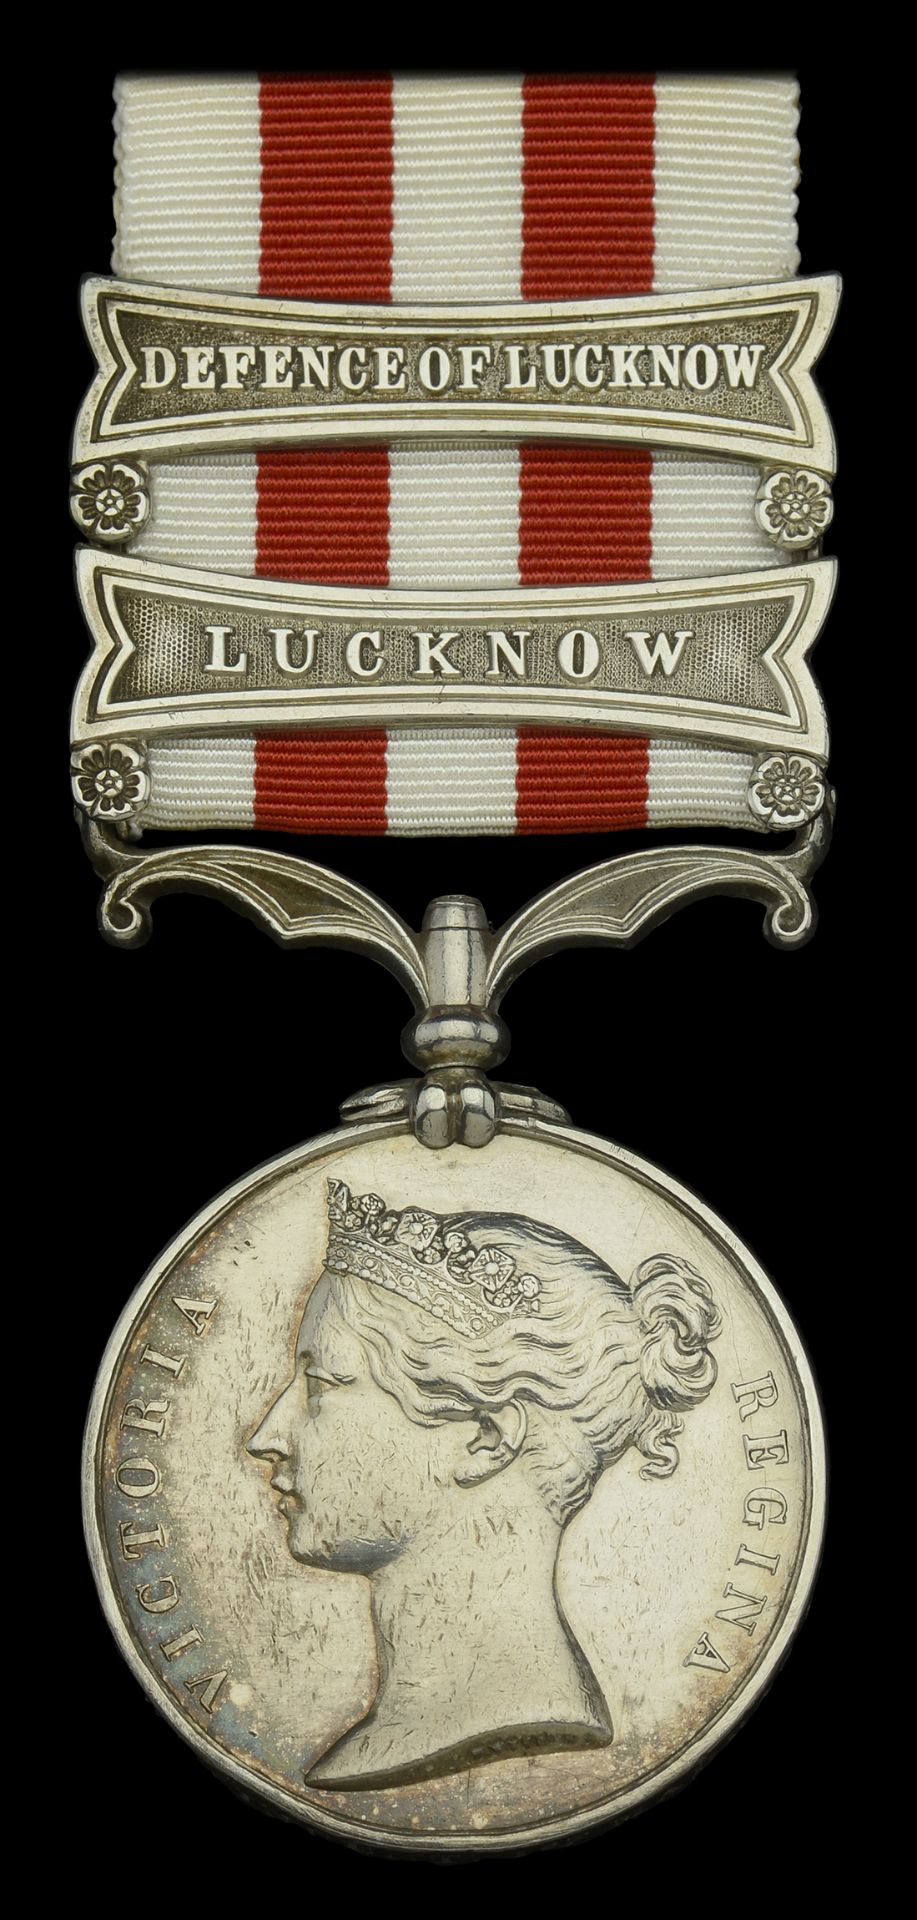 Indian Mutiny 1857-59, 2 clasps, Defence of Lucknow, Lucknow (Corpl. W. Vincent, 1st. Madras...